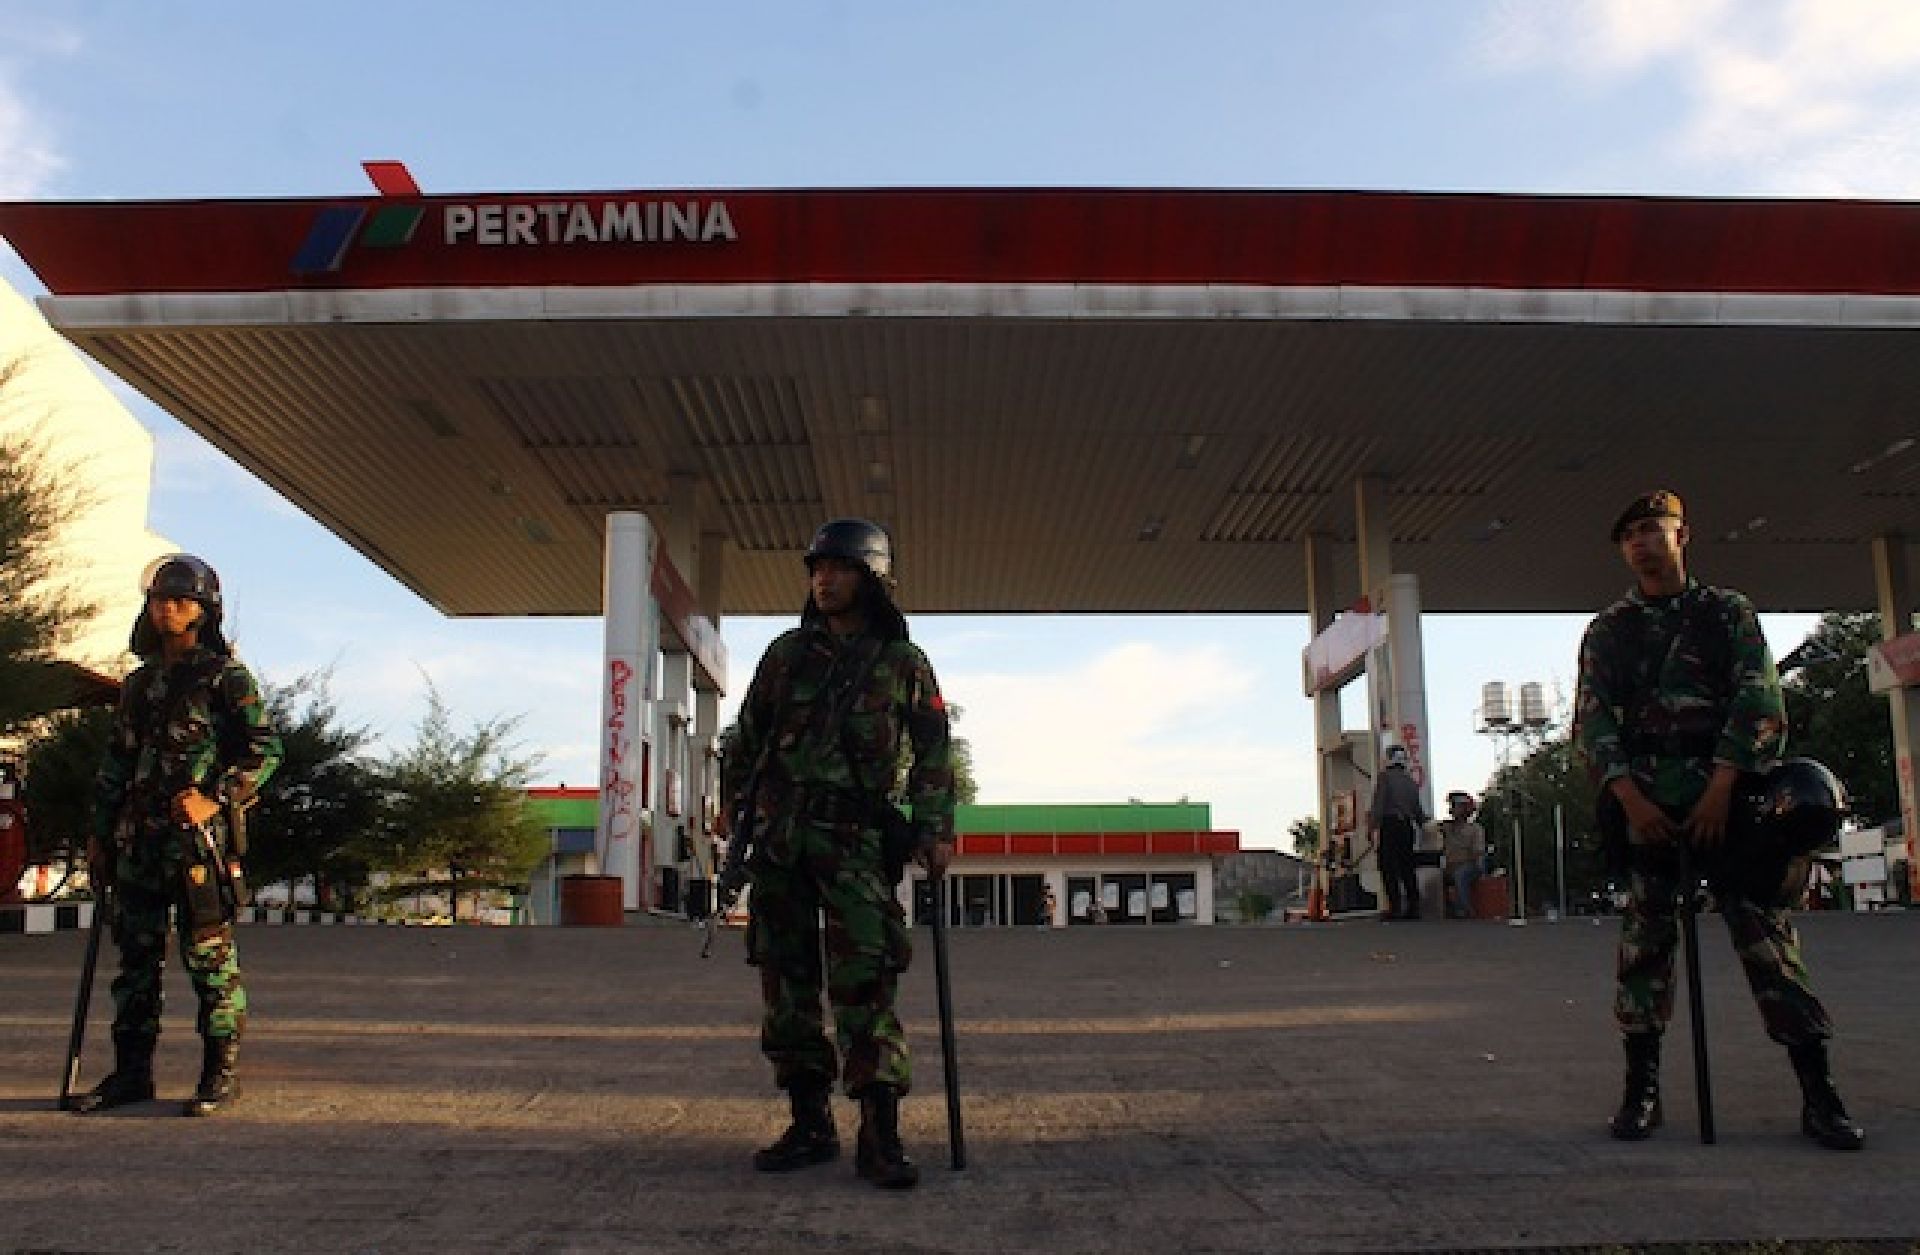 Indonesia Enacts a Controversial Fuel Subsidy Cut